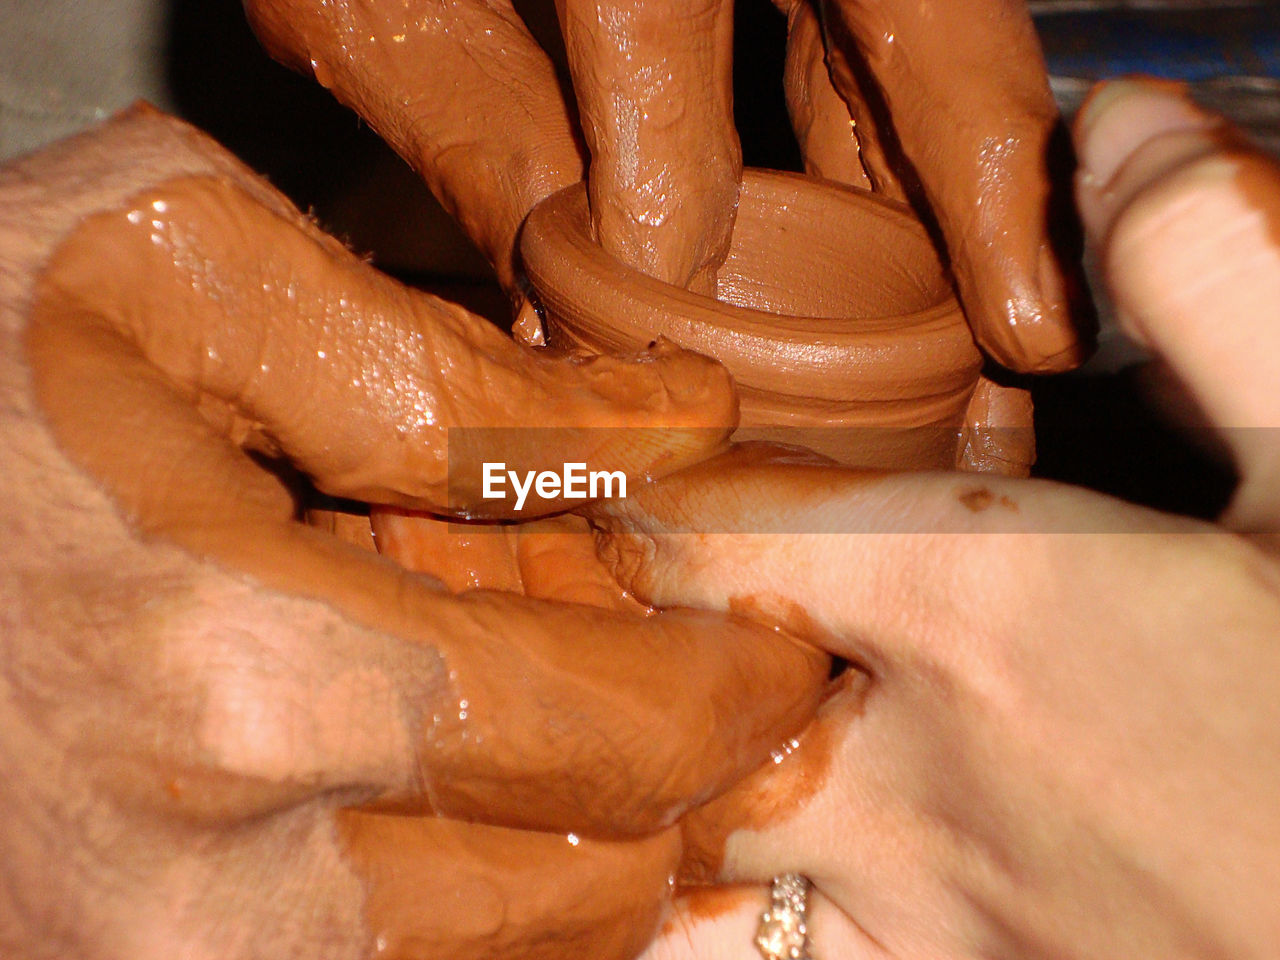 MIDSECTION OF PERSON WORKING WITH CHOCOLATE